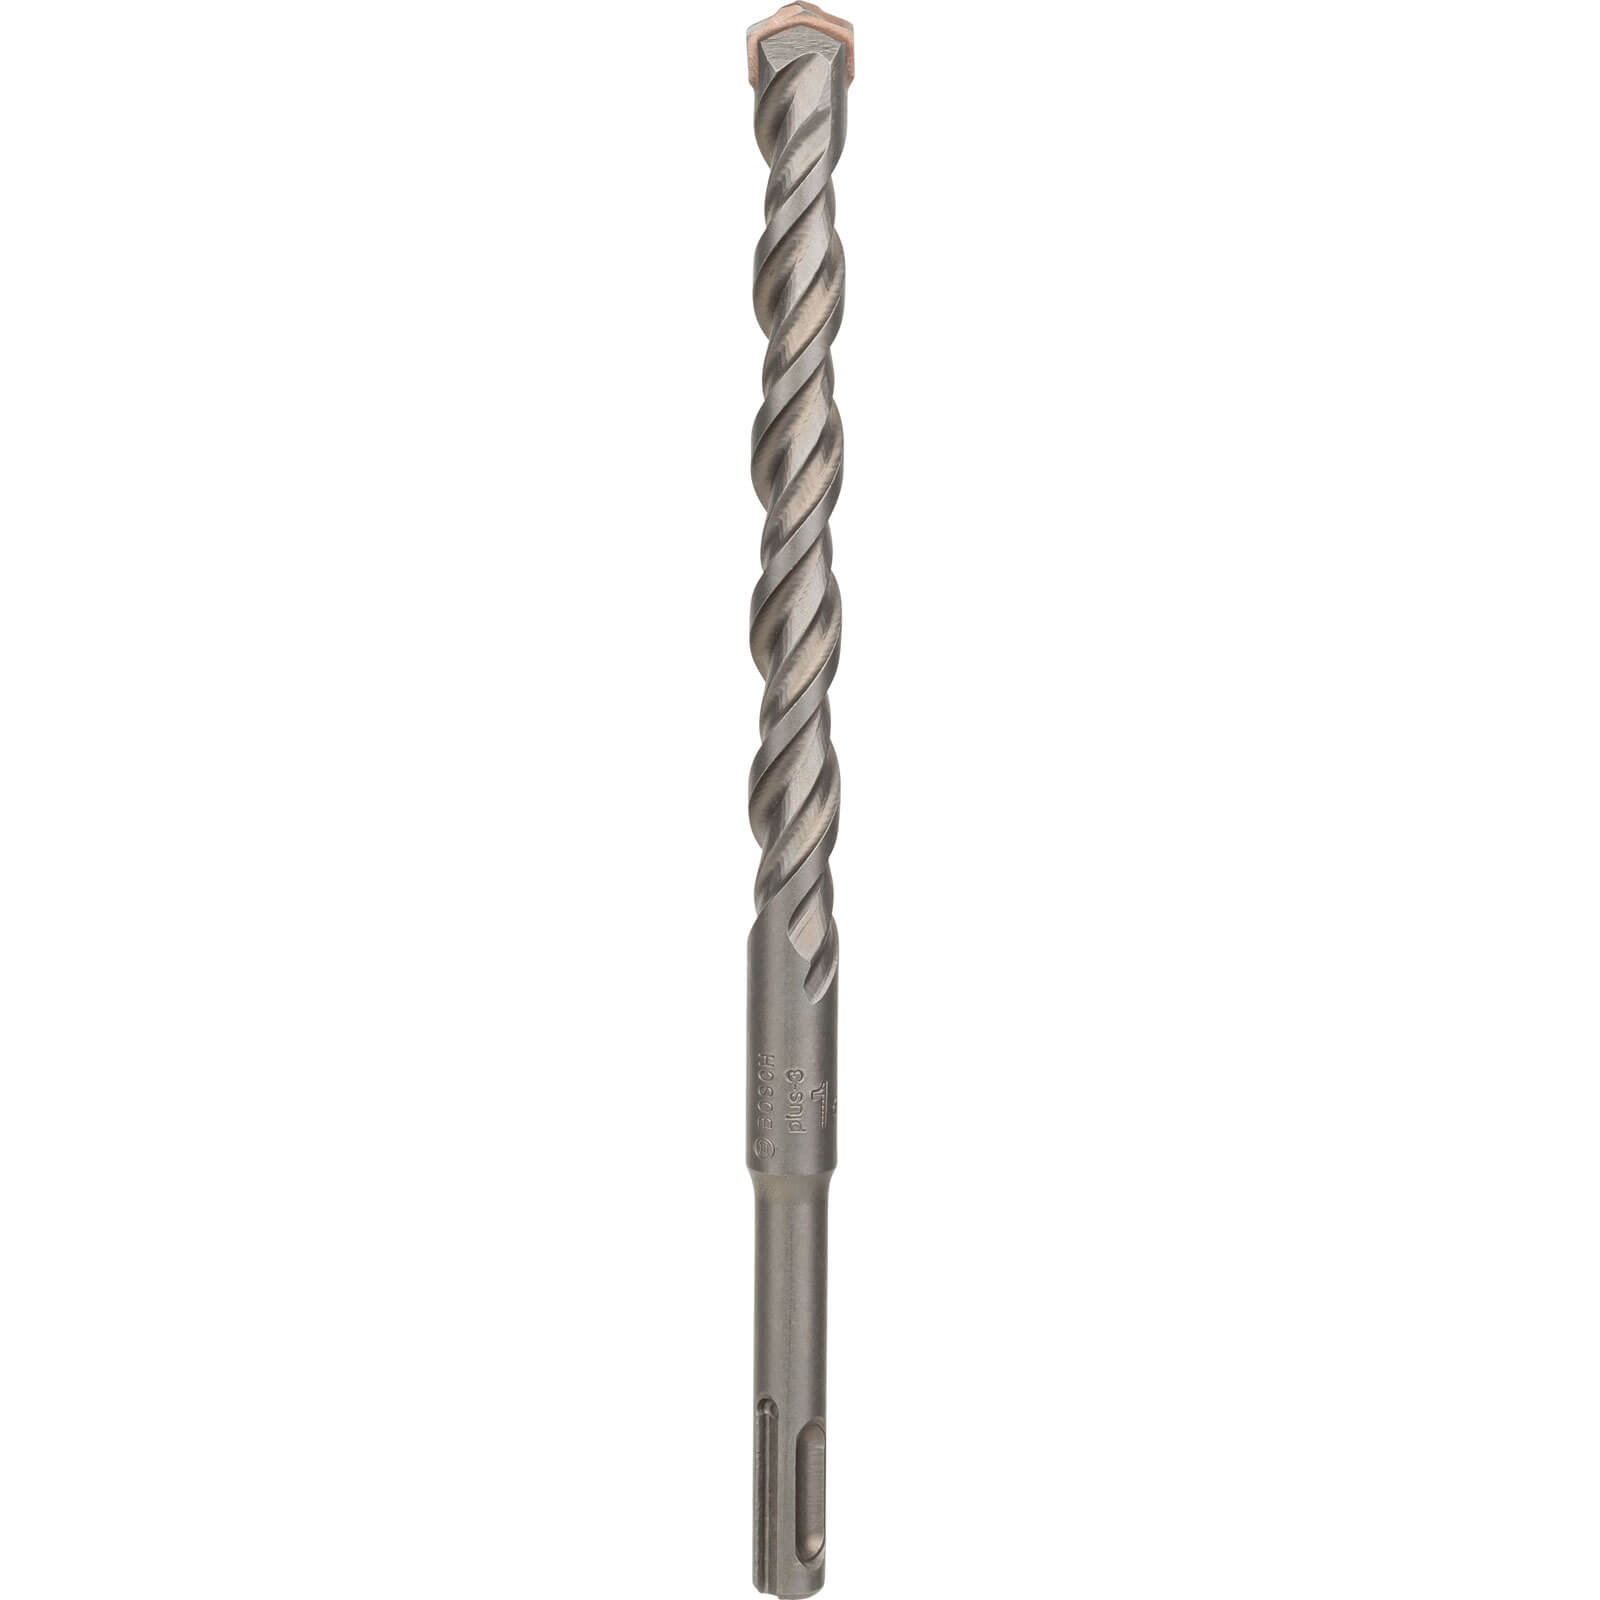 Image of Bosch Series 3 SDS Plus Masonry Drill Bit 14mm 210mm Pack of 1